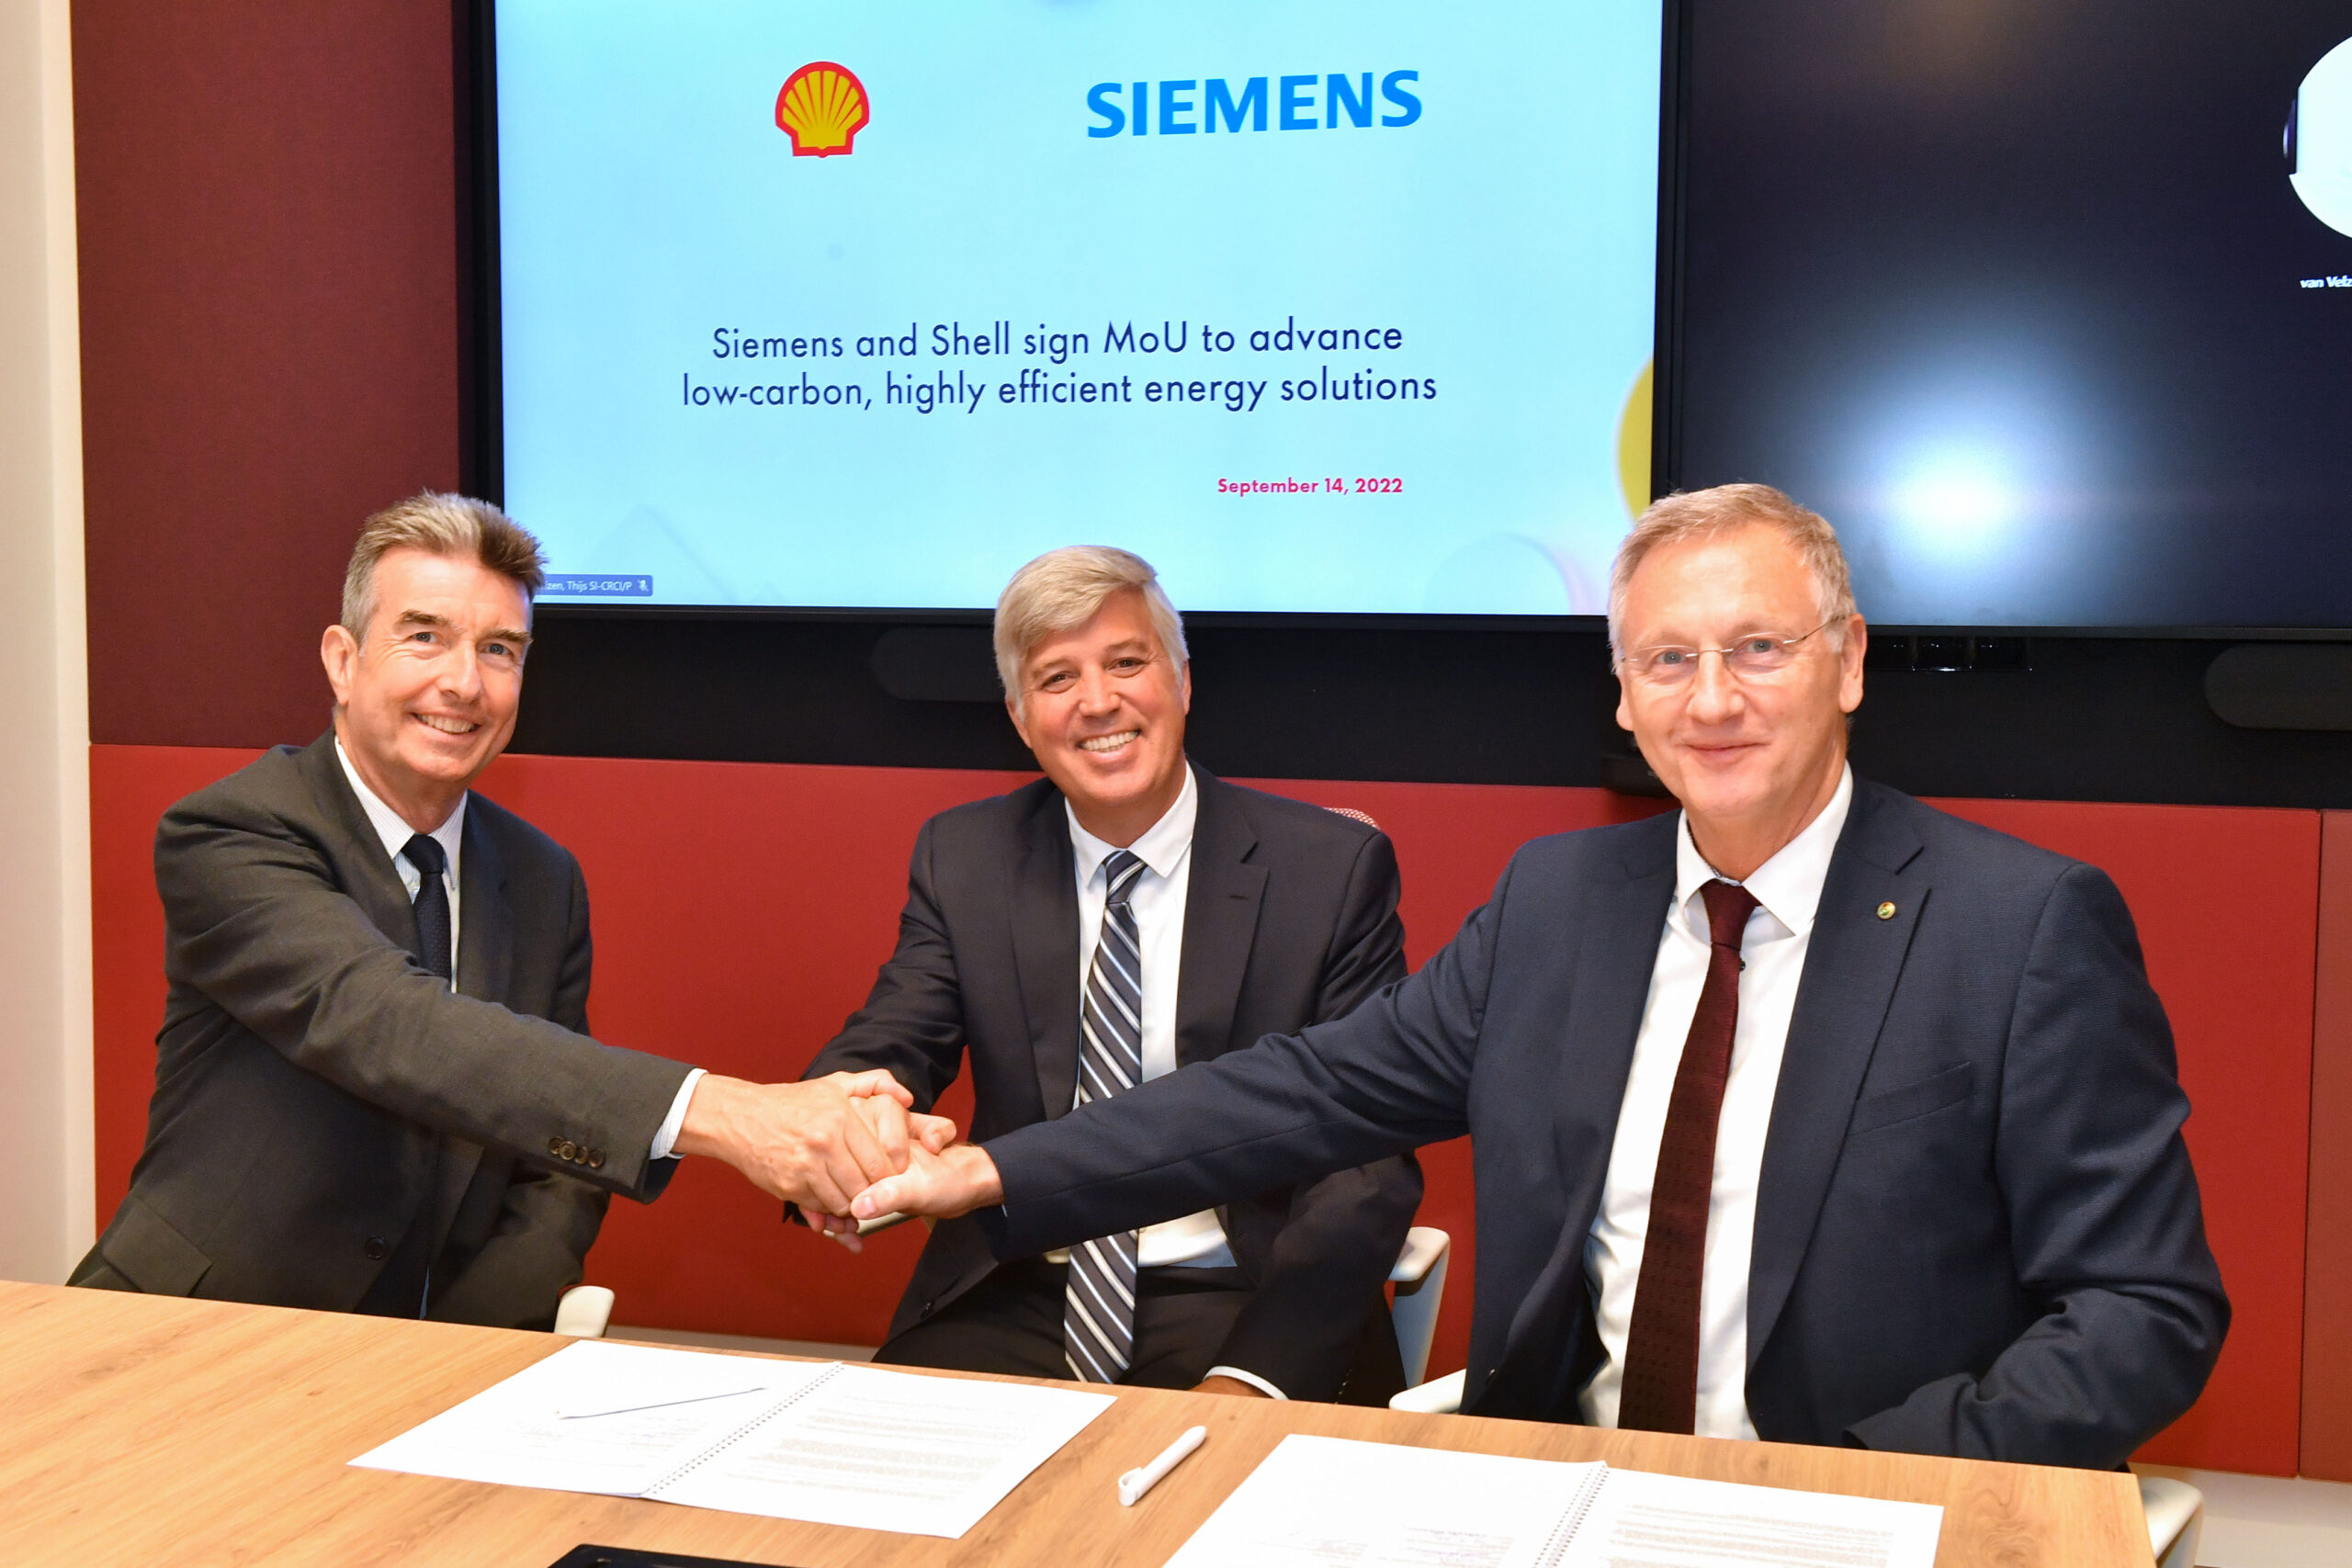 Siemens and Shell sign MoU